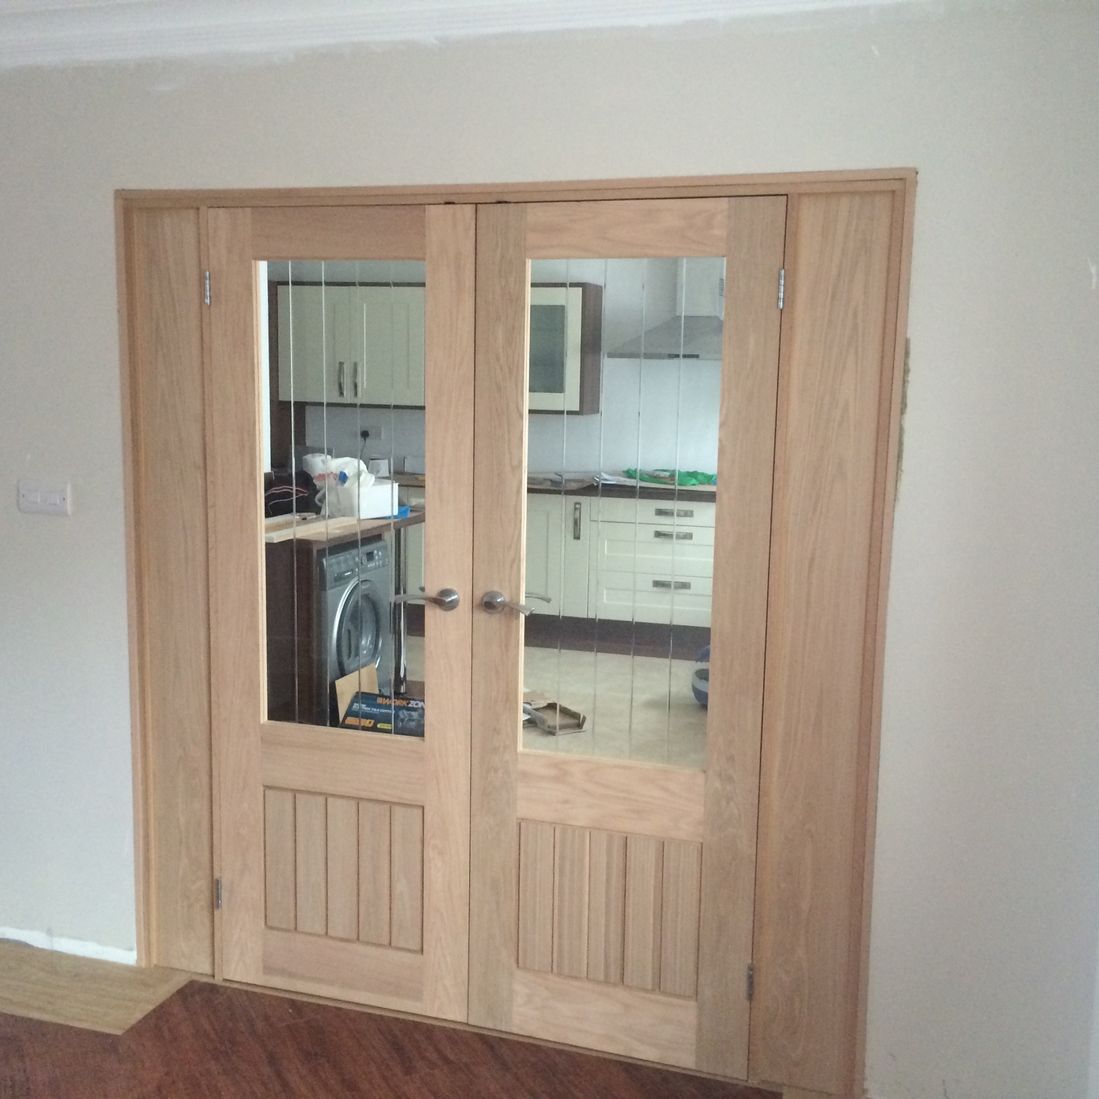 STK Joinery